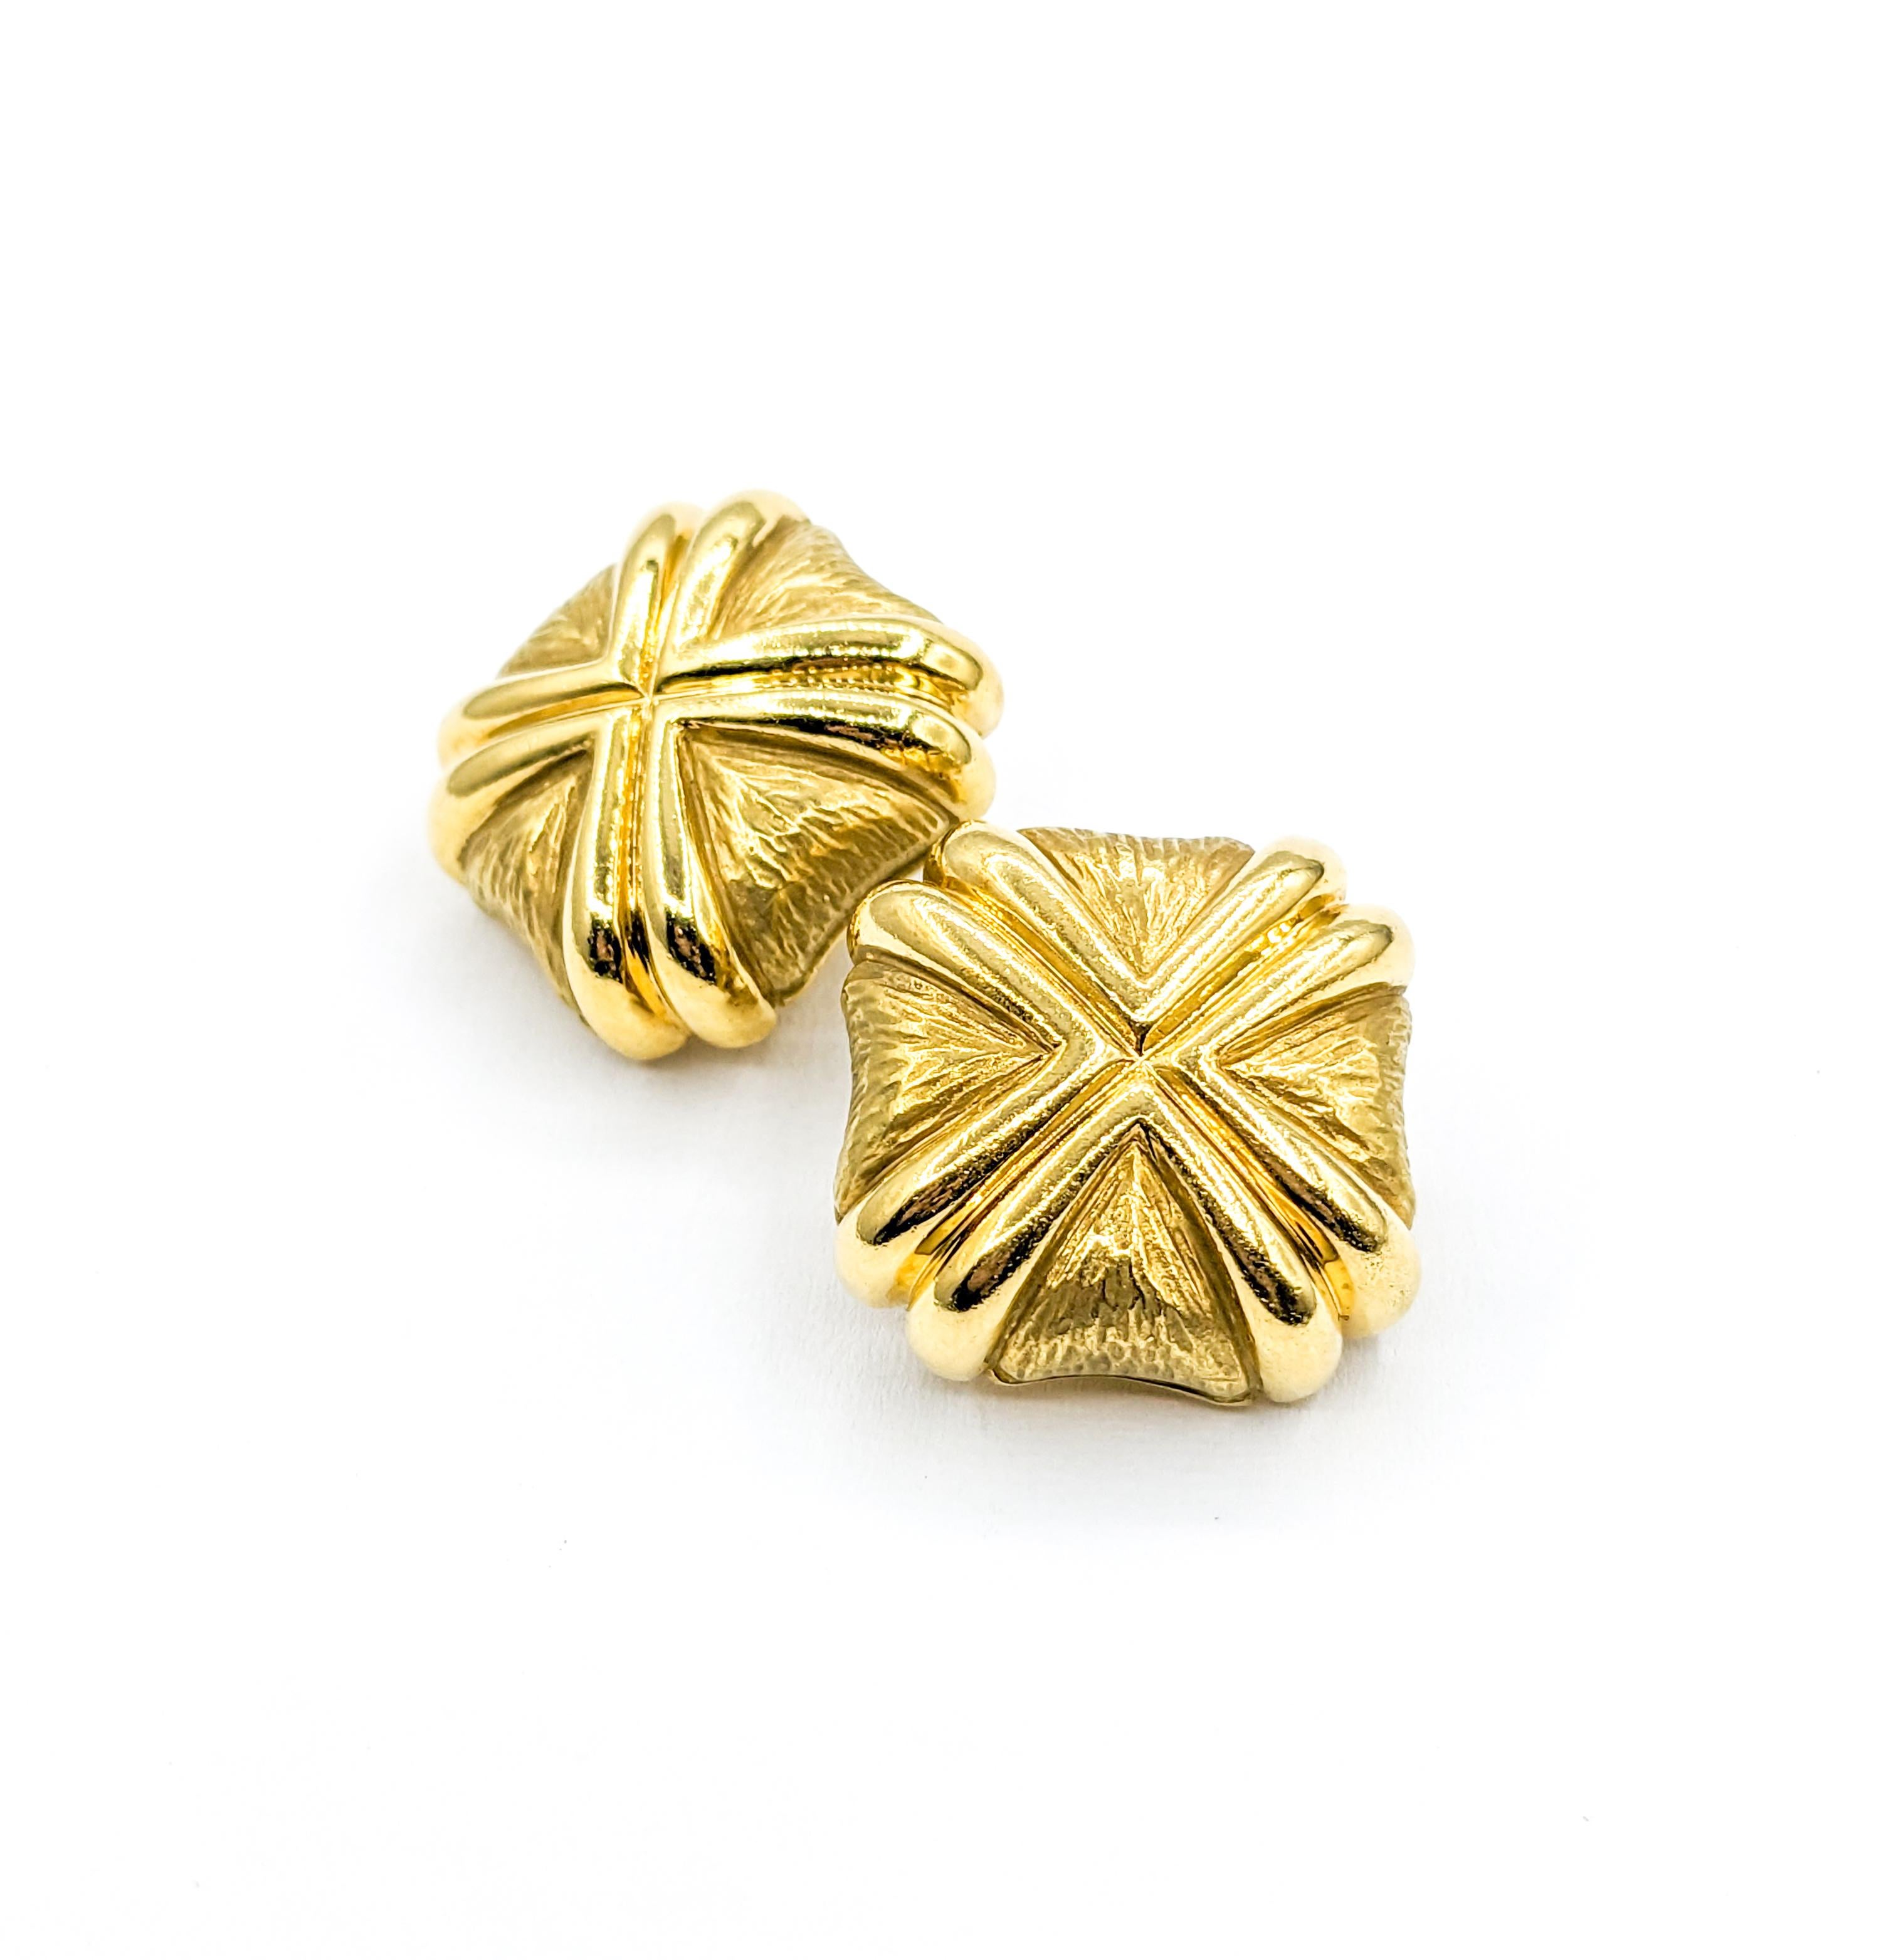 Statement 18k Square X Clip On Earrings 2